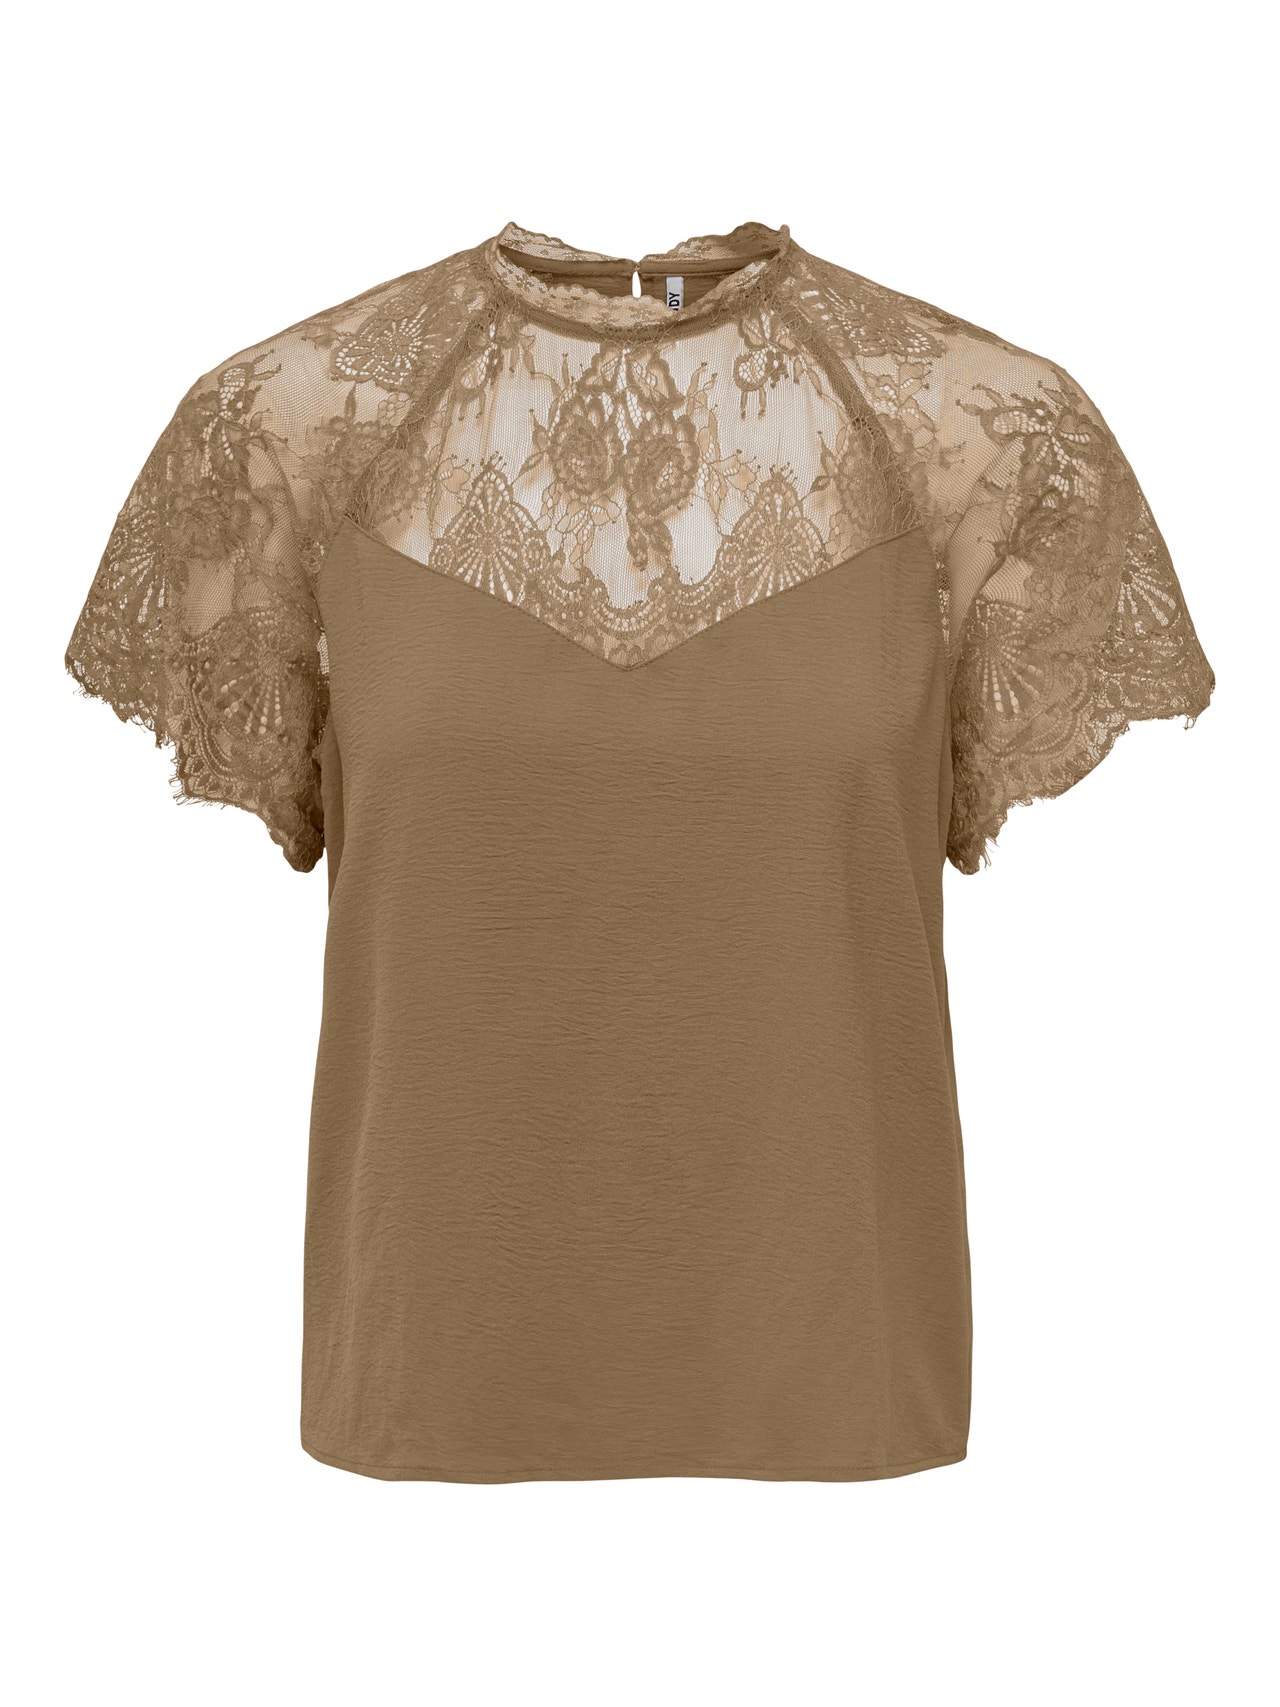 ONLY Lace detail Top -Toasted Coconut - 15276919